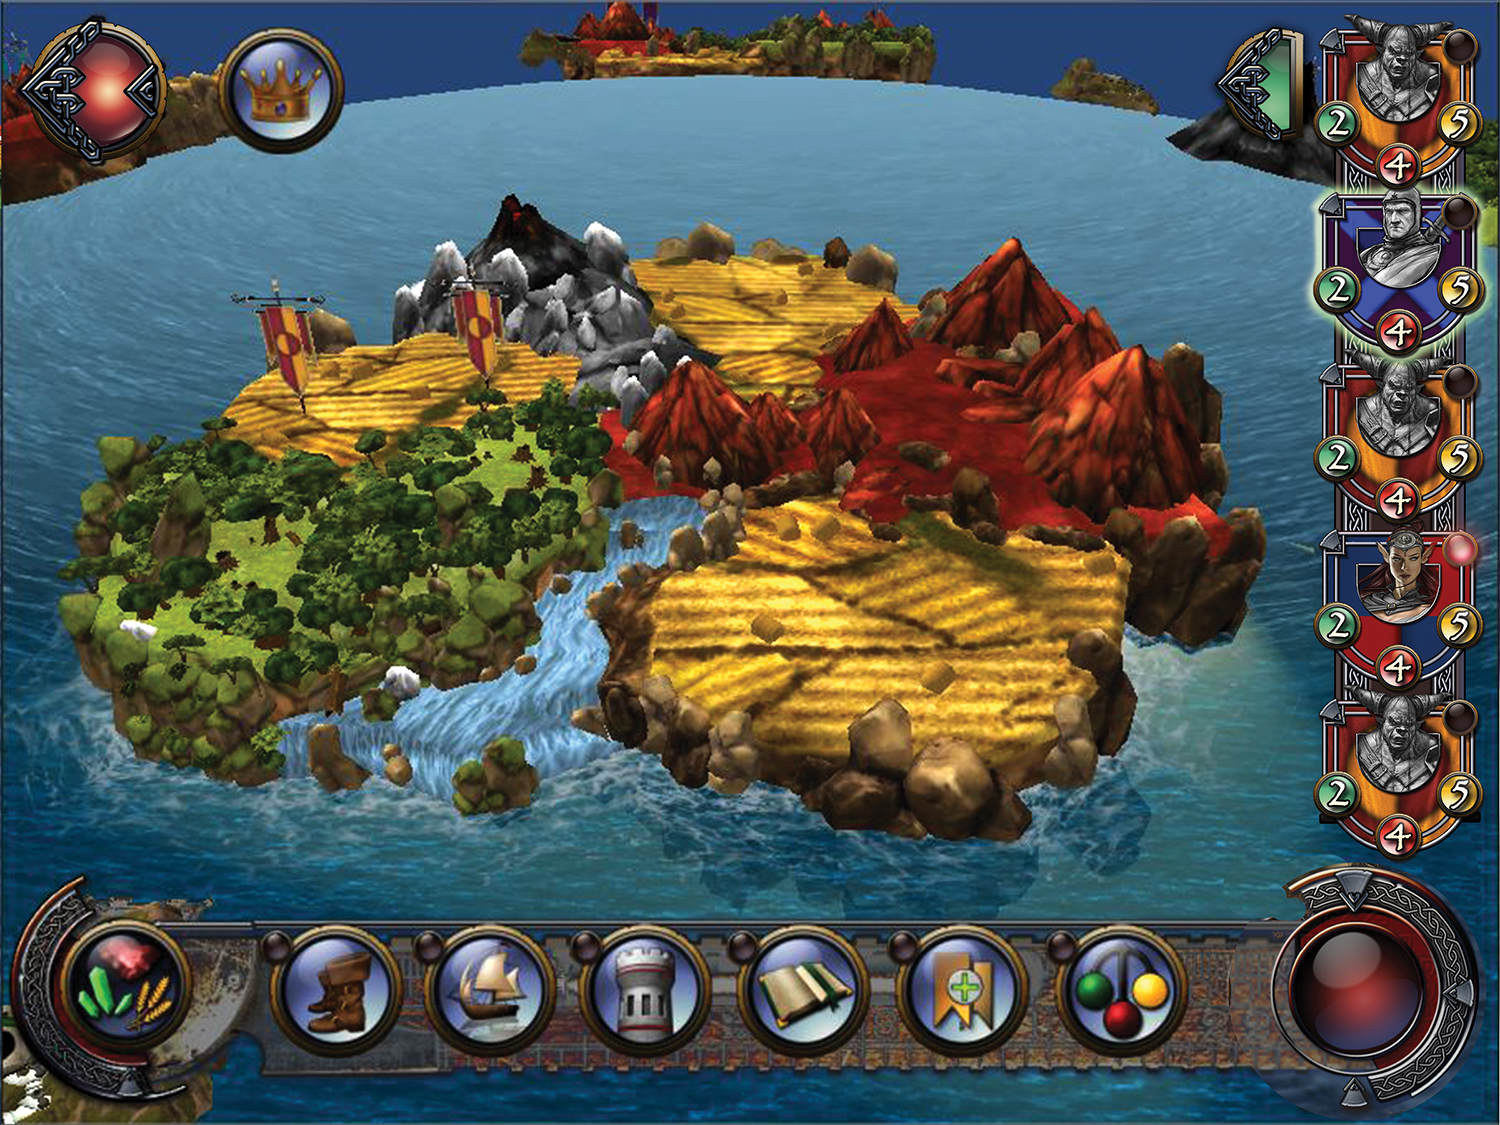 An in-game screenshot of the Tiny Epic Kingdoms territory Galson.